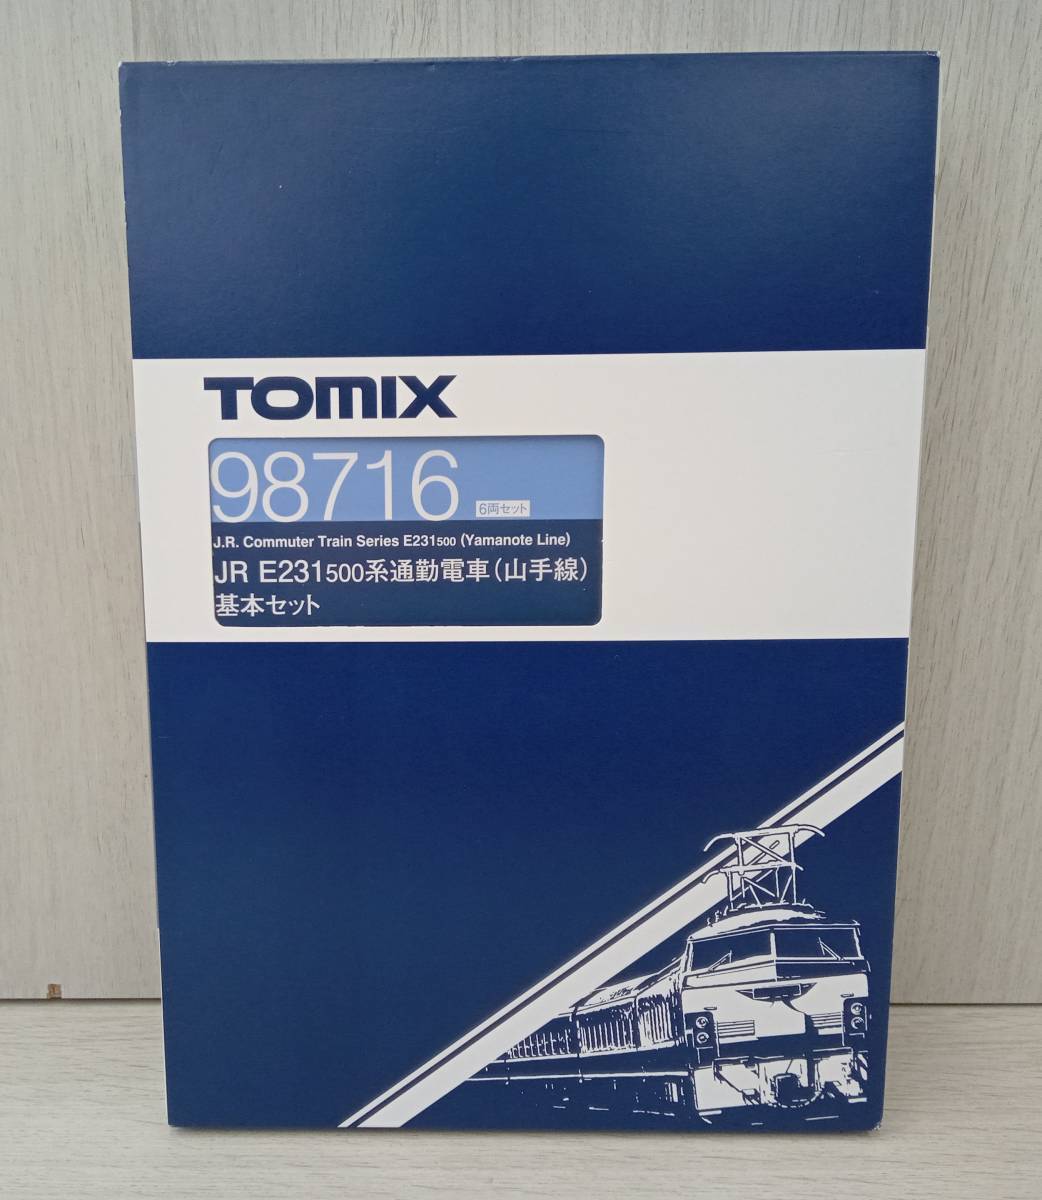 Nゲージ TOMIX 98716 JR E231-500系通勤電車(山手線)基本セット